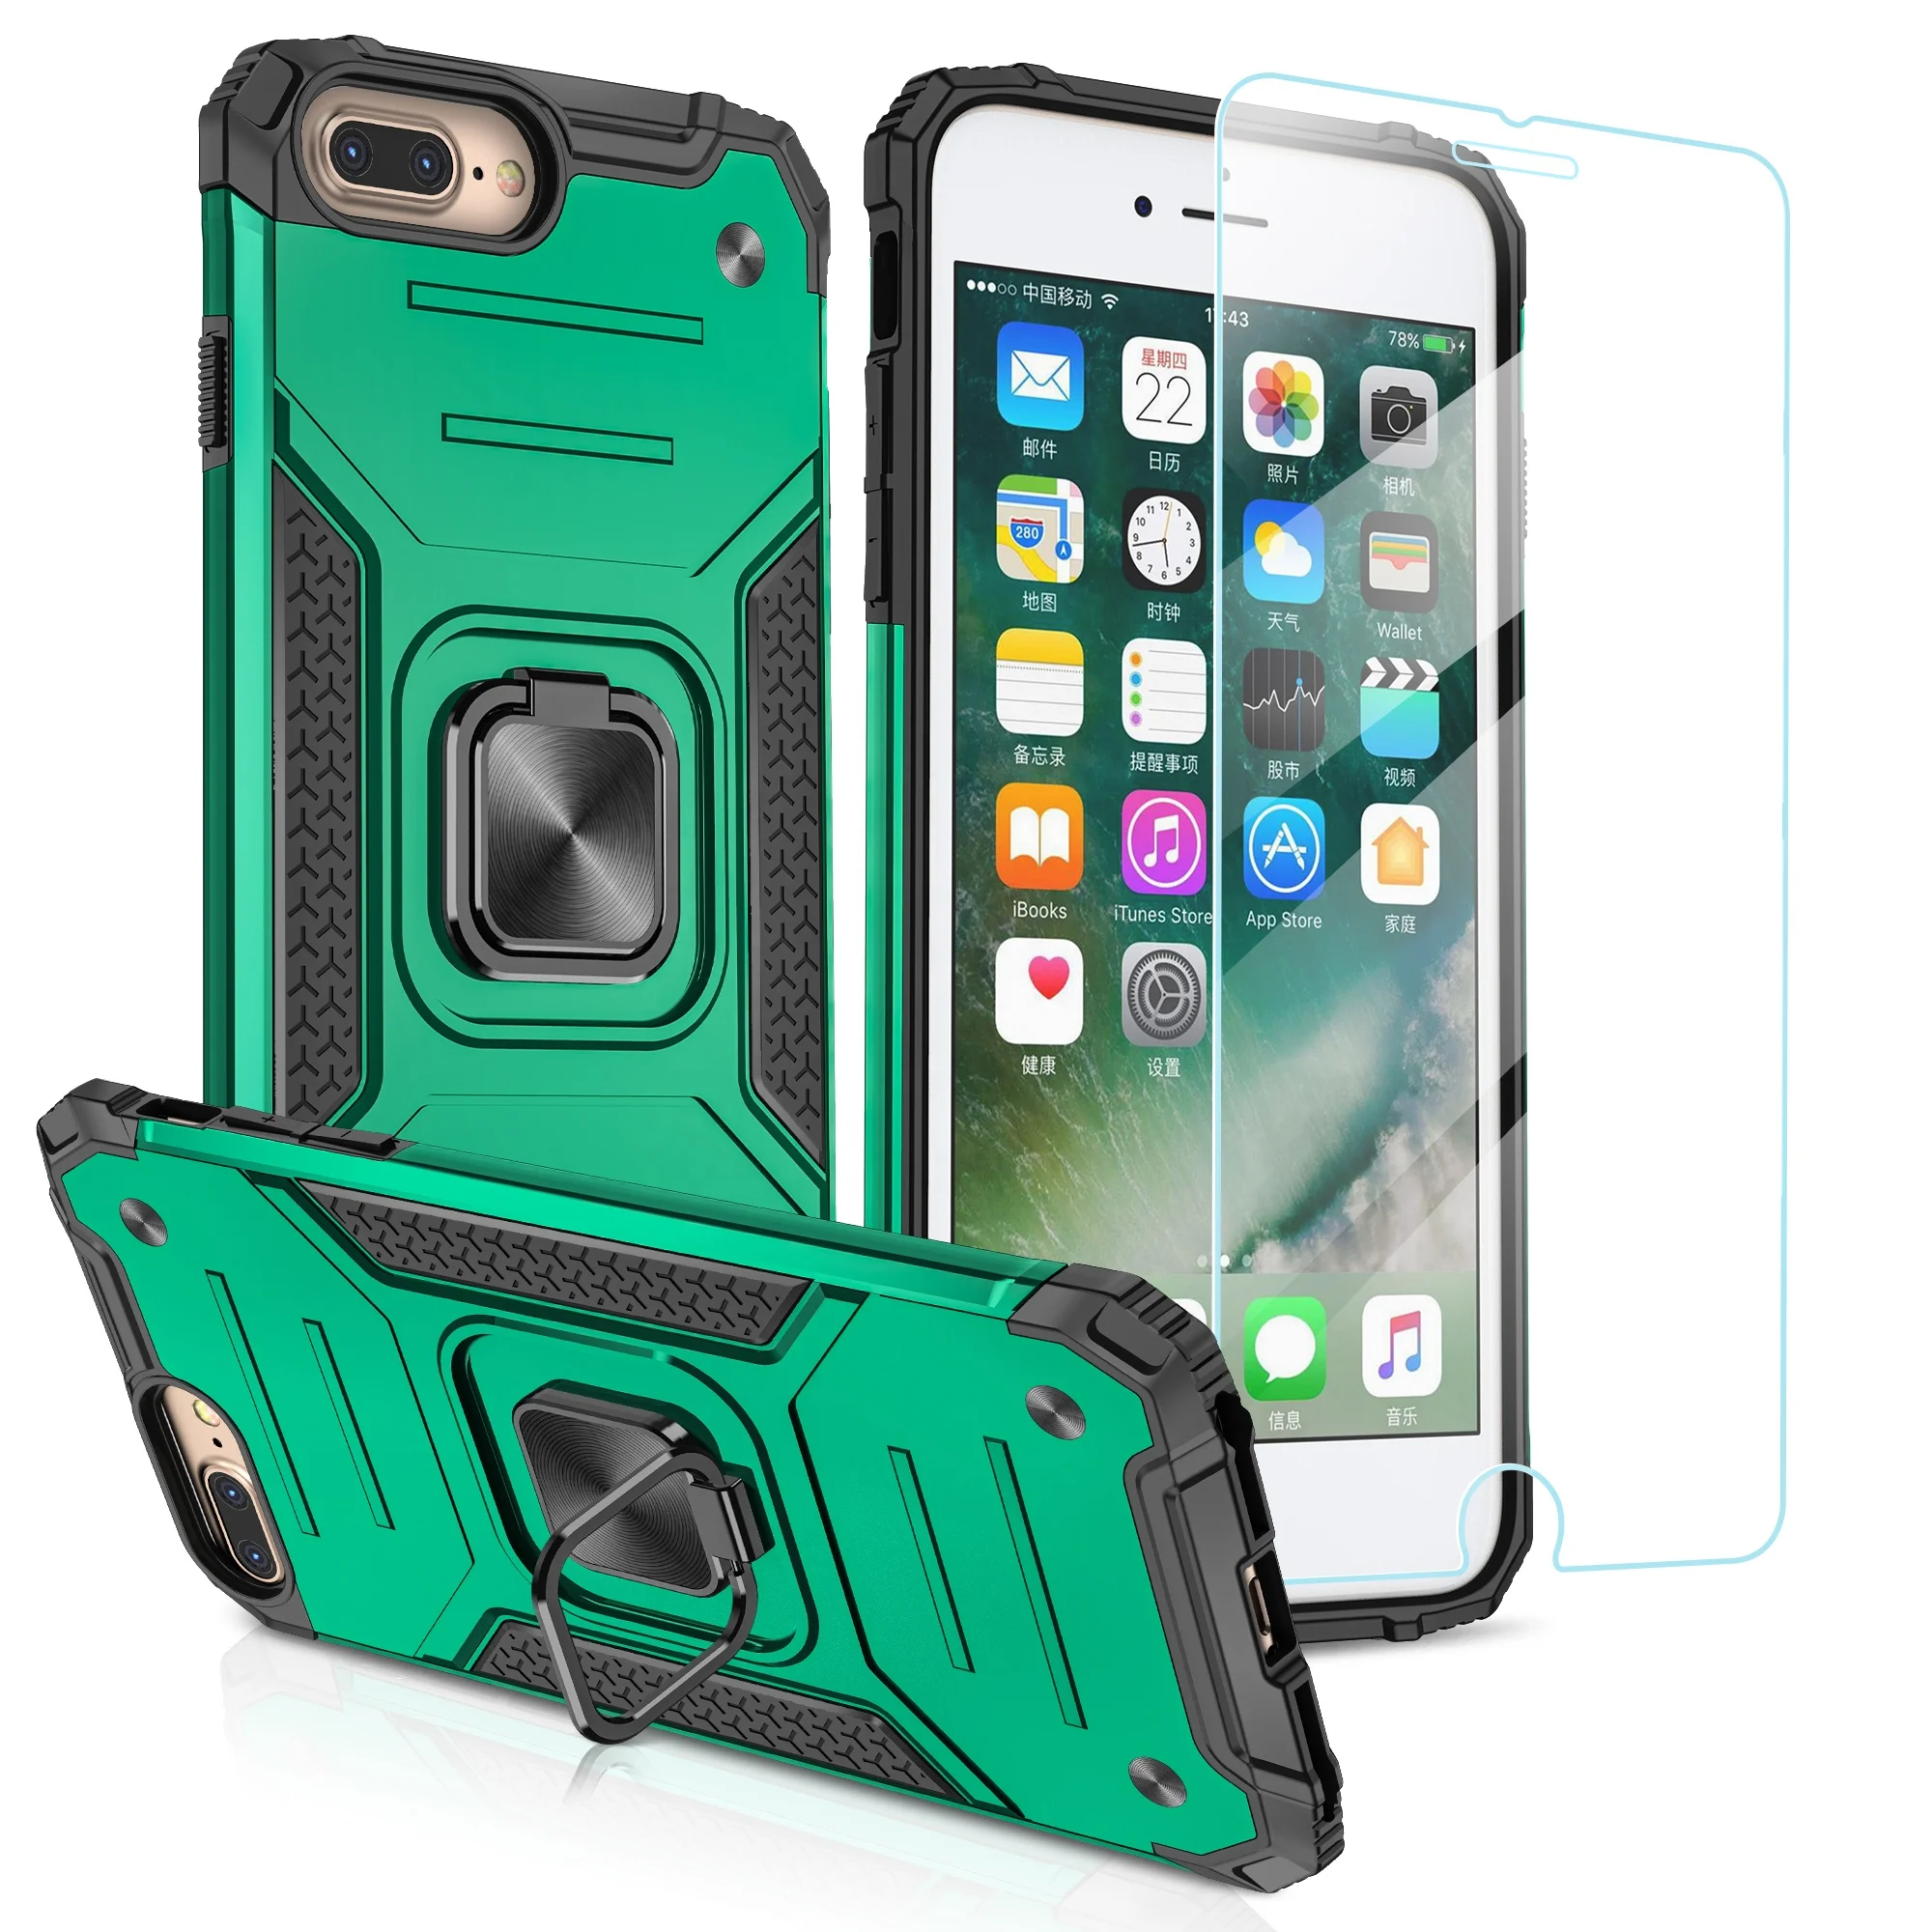 

Custom 3 in 1 PC Bumper Shockproof Mobile Case with Metal Kickstand Military Phone Case for iPhone 7P/8P/X/Xs Max/Xs/Xr/11/12, Multi colors